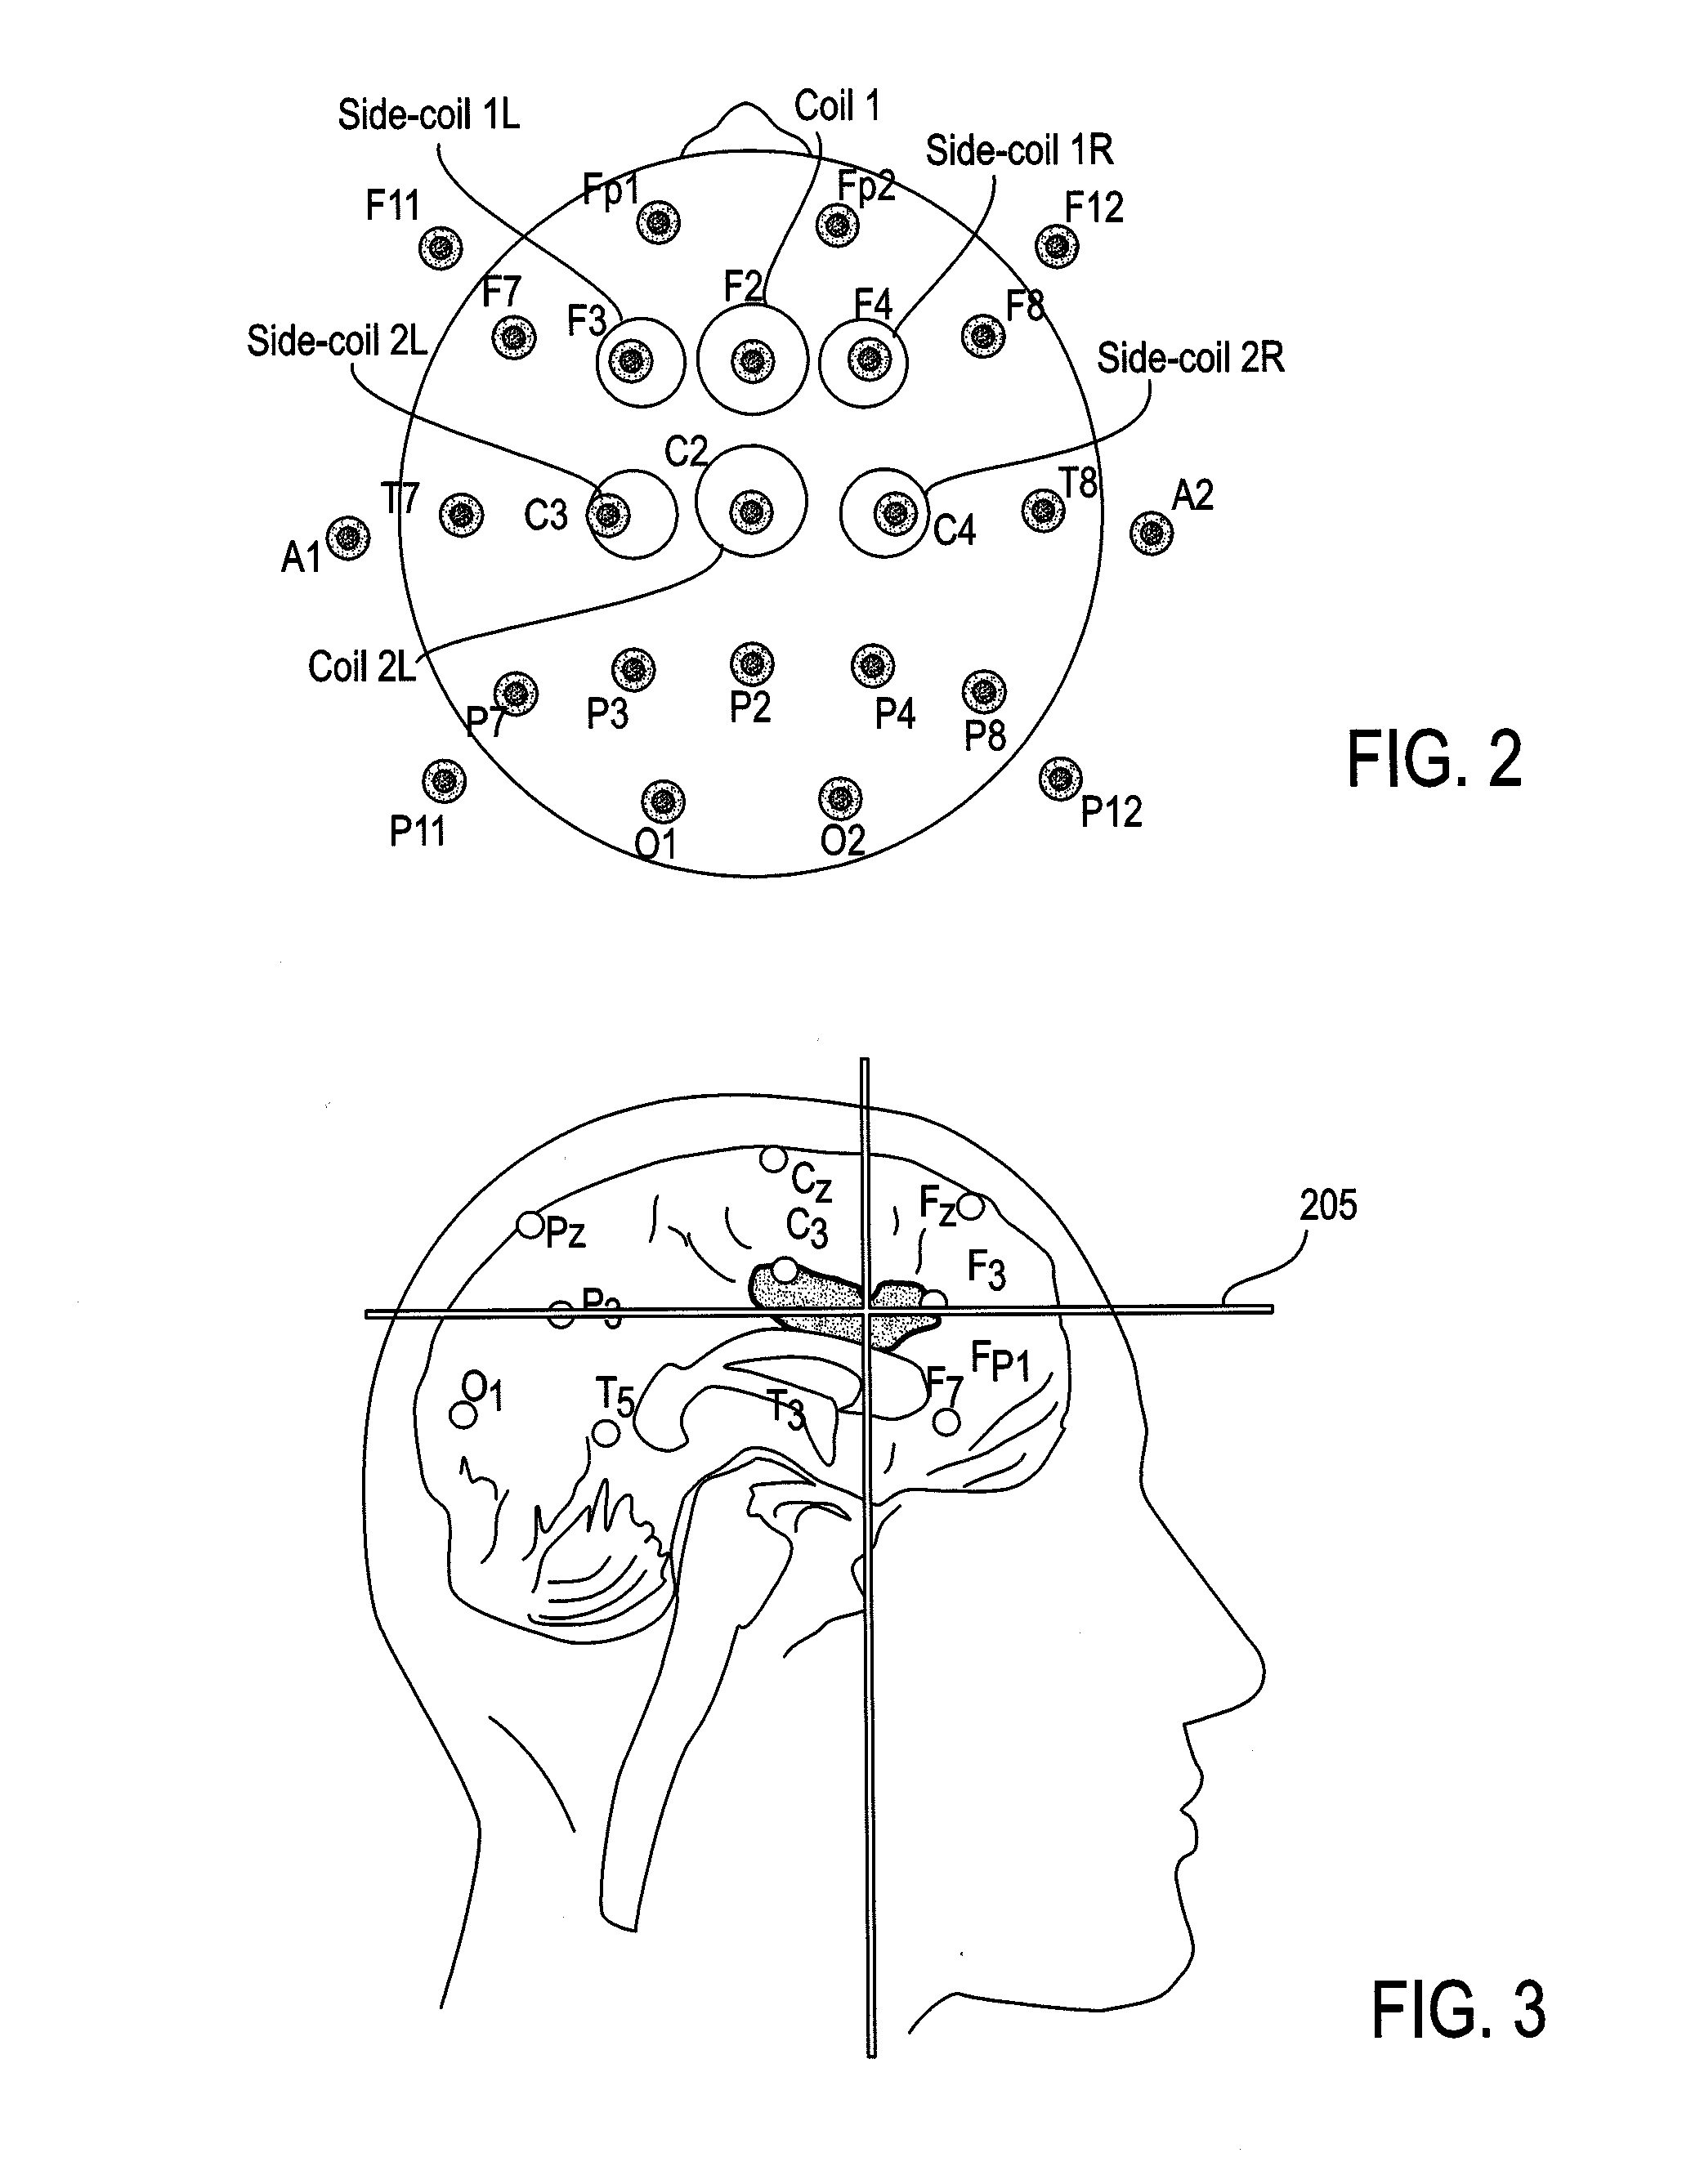 Transcranial magnetic stimulation field shaping